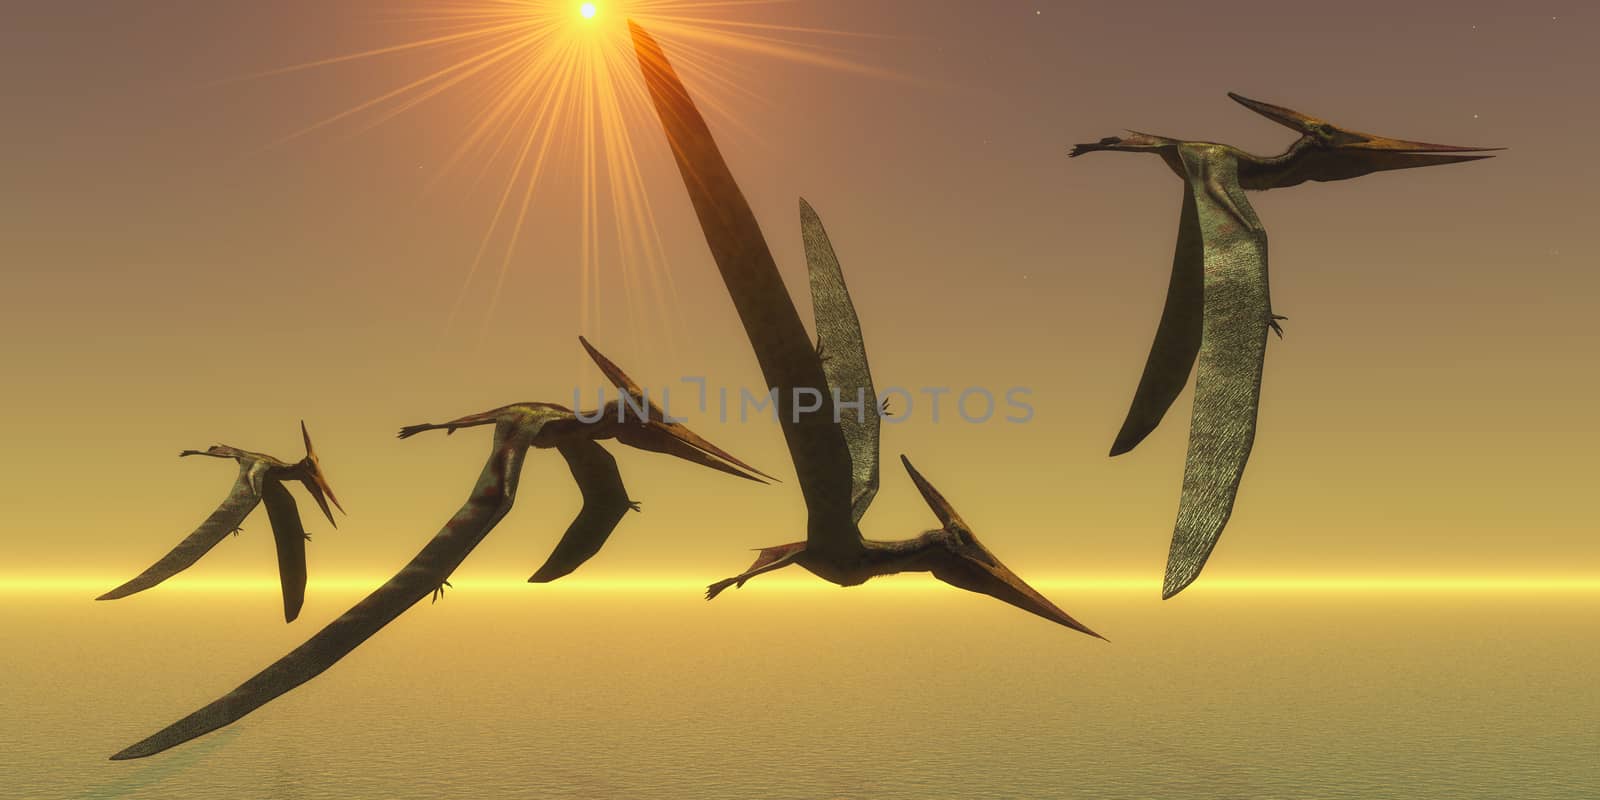 Pteranodons are flying reptiles that lived in the Cretaceous Period of North America in Earth's history.